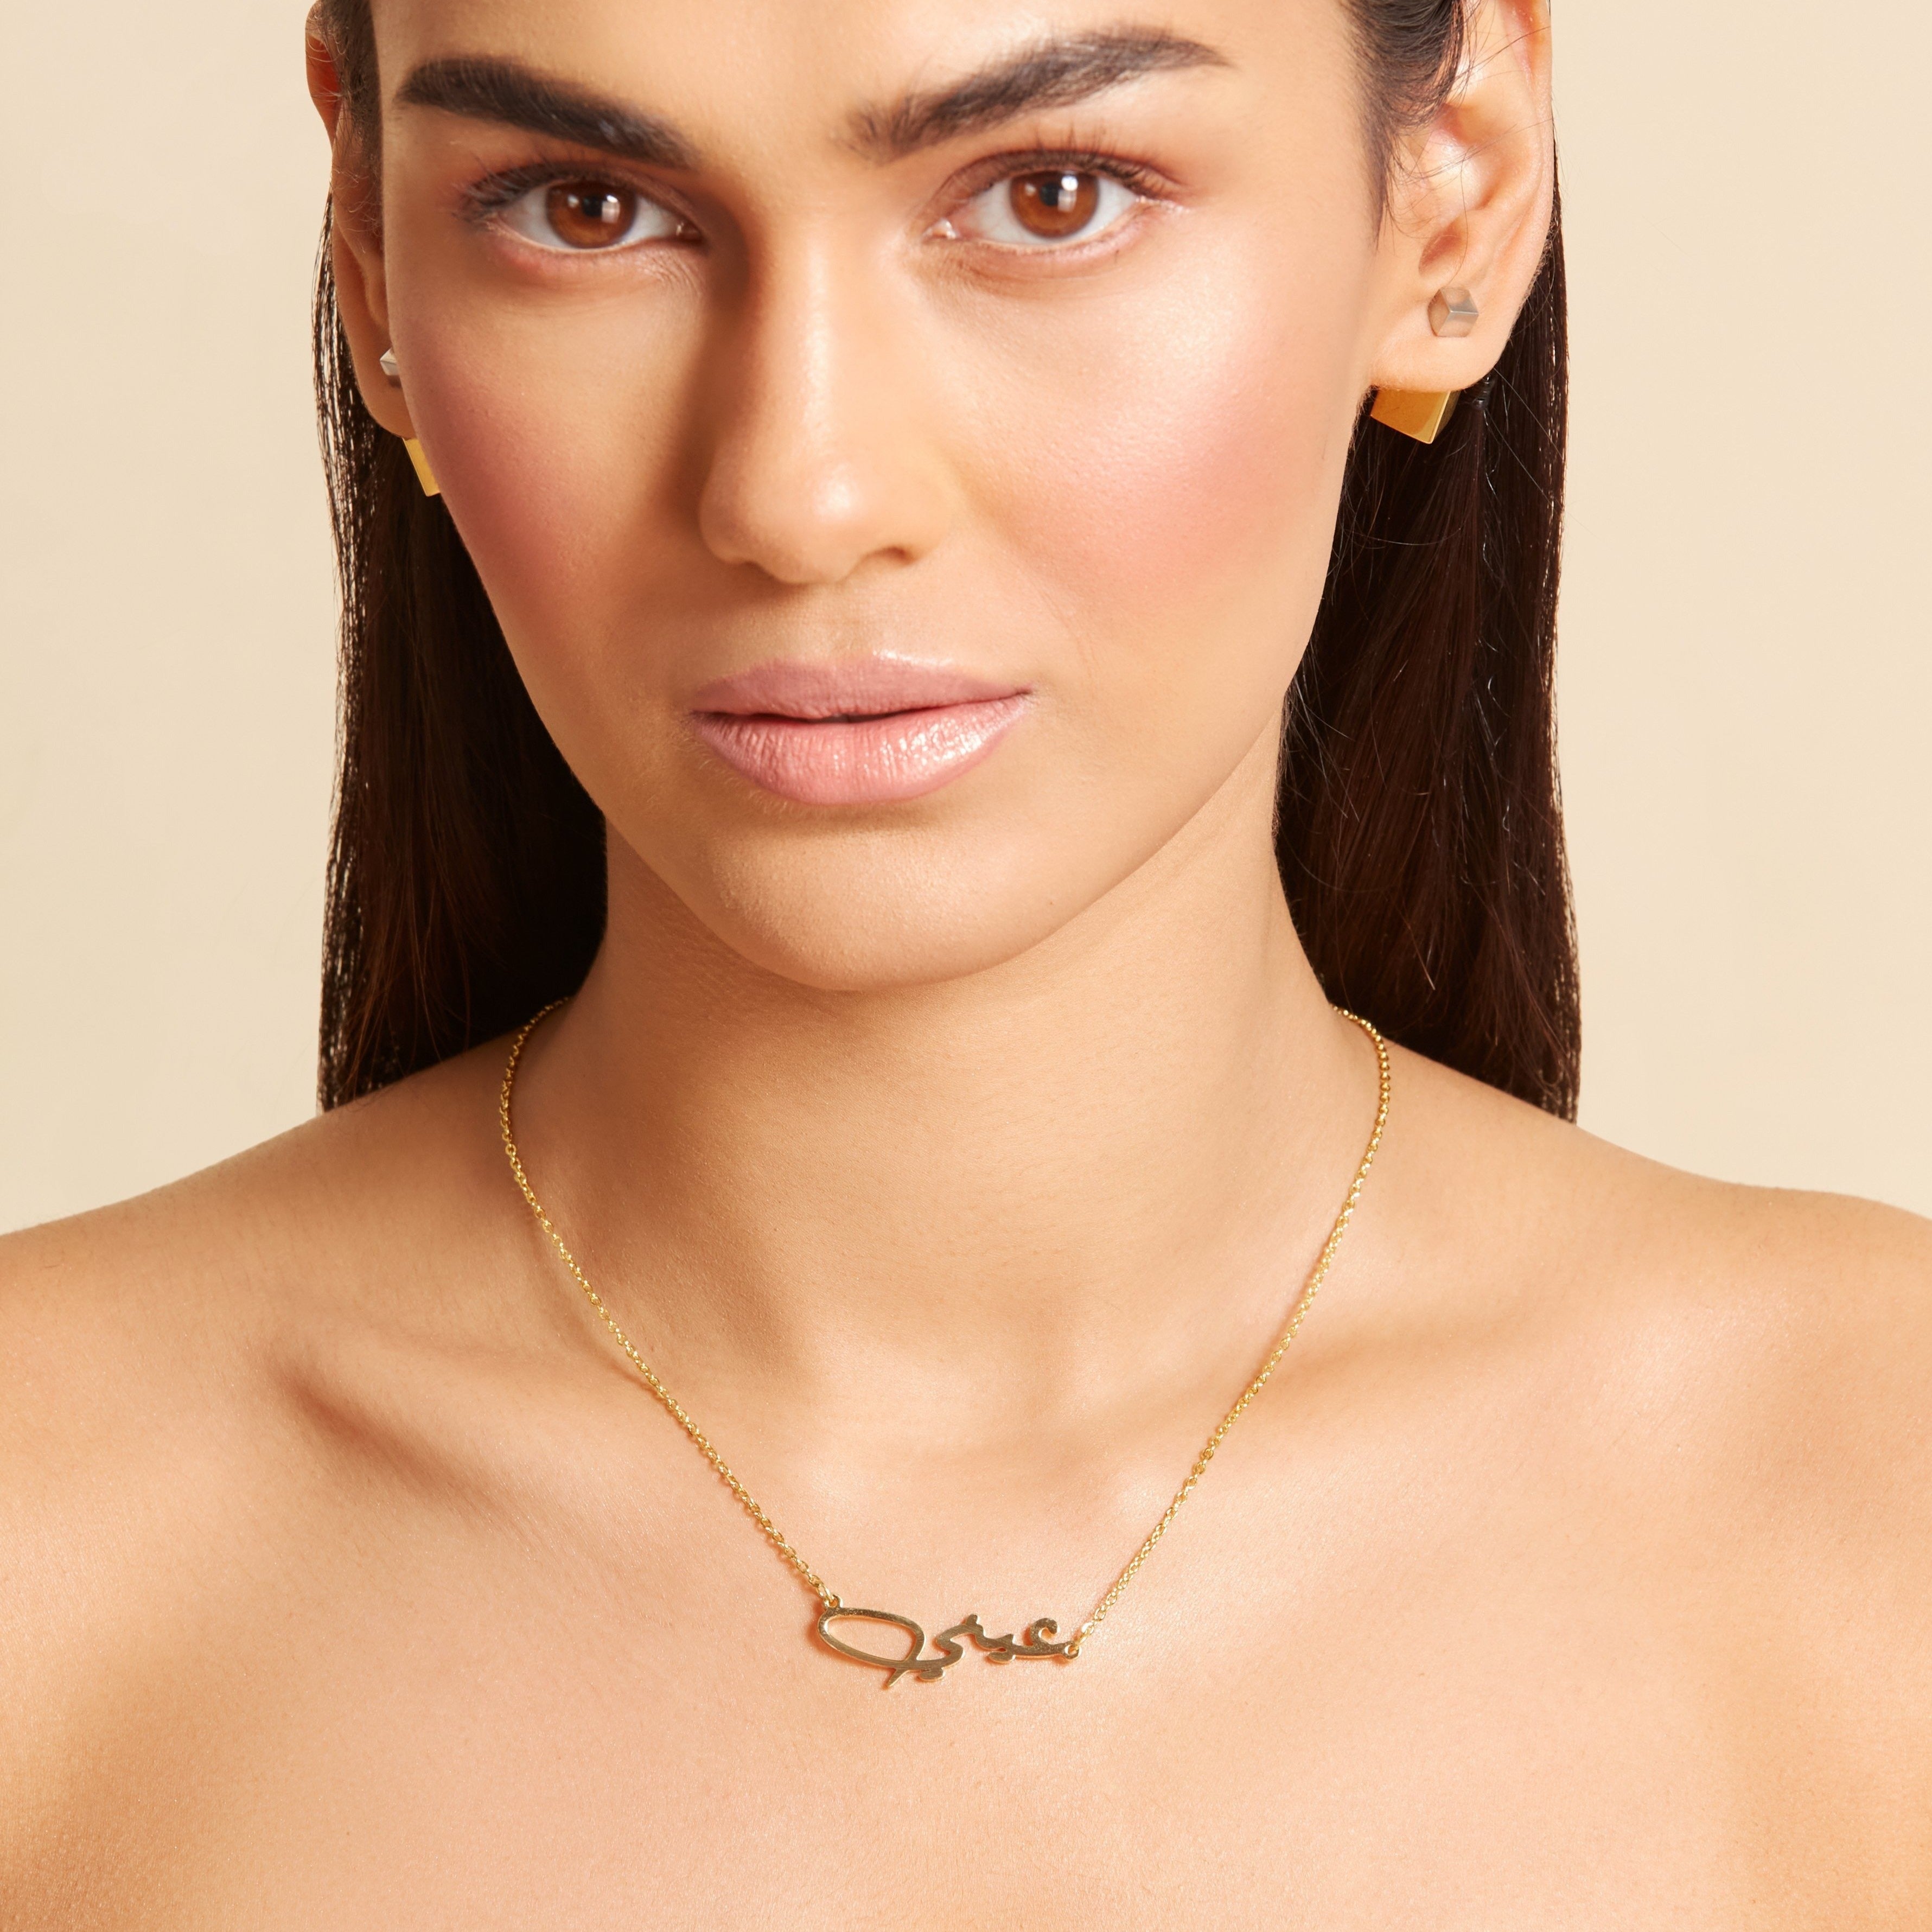 Arabic Name Necklace - Nameplate Calligraphy Necklace Gold